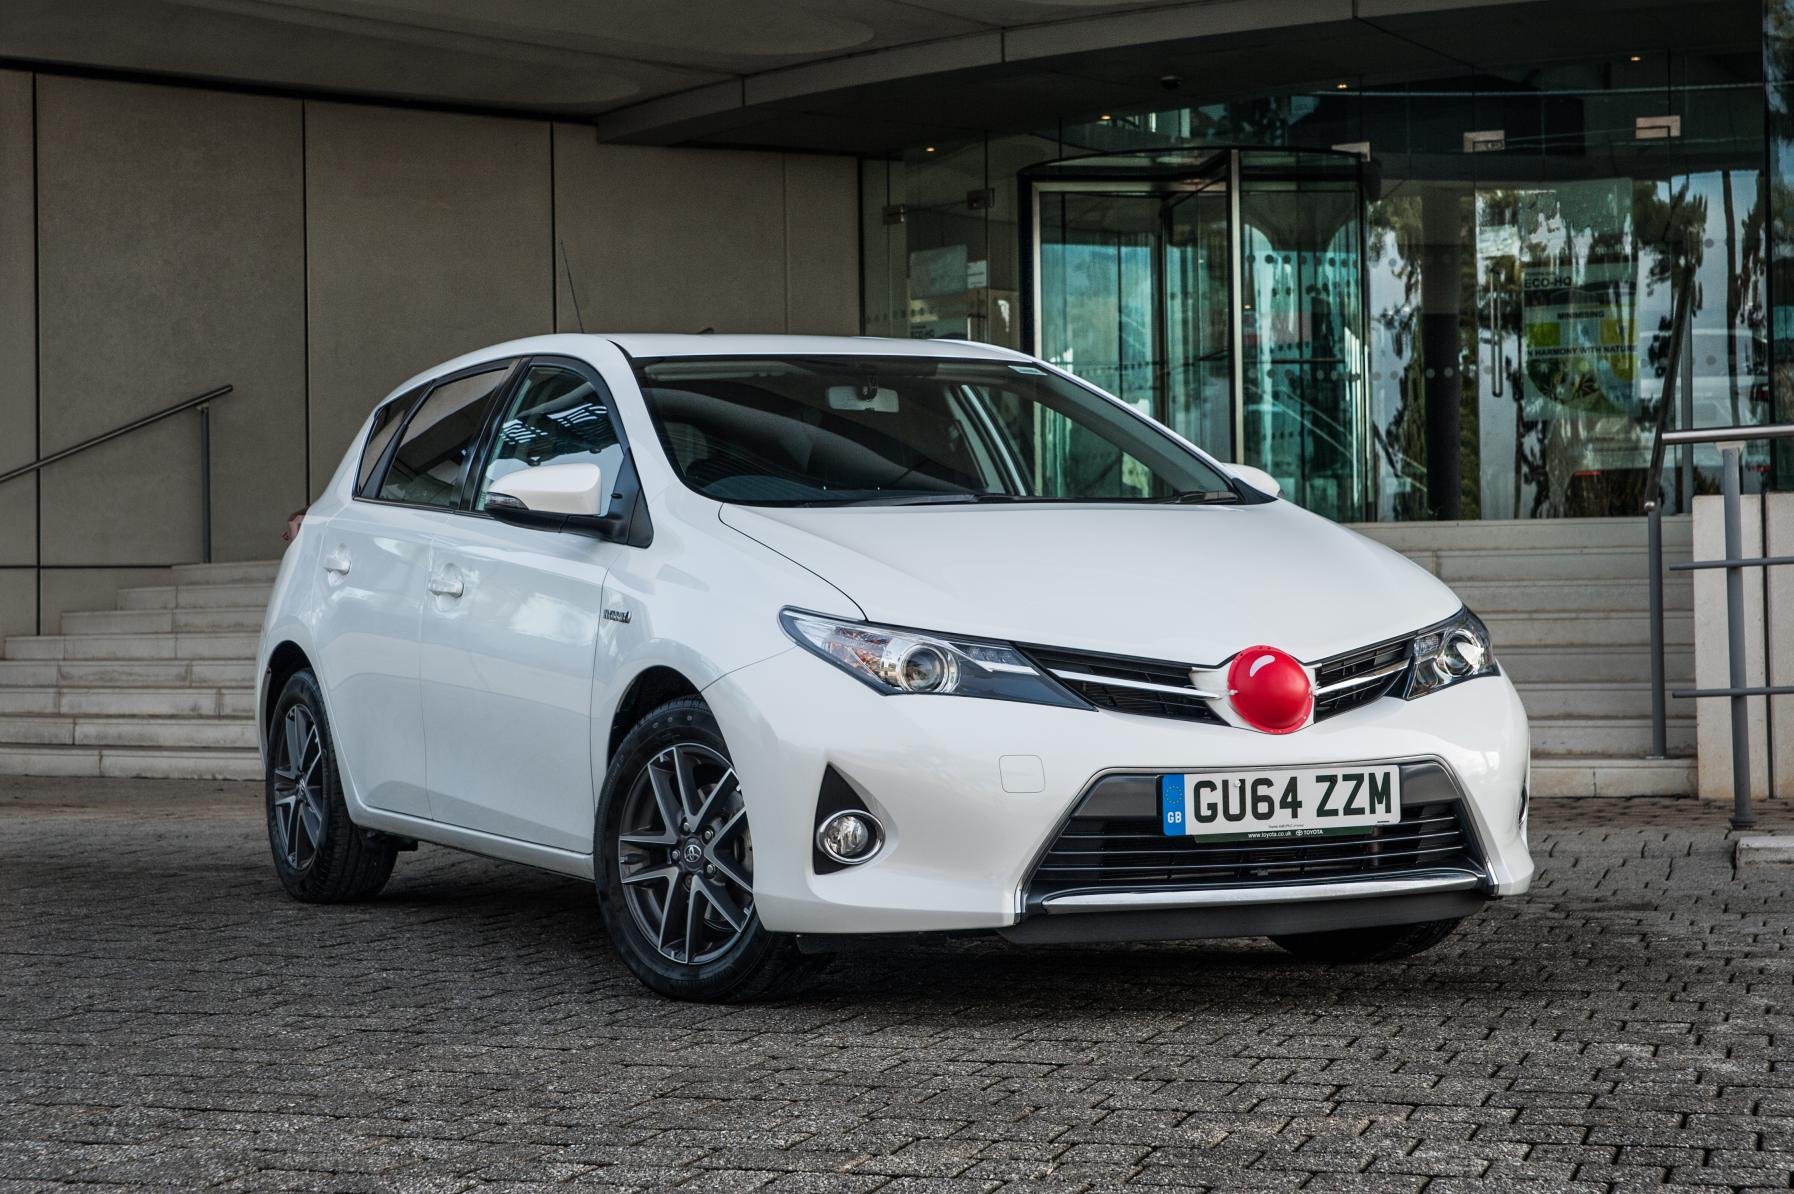 toyota-selling-clown-noses-for-cars-to-support-red-nose-day_2.jpg